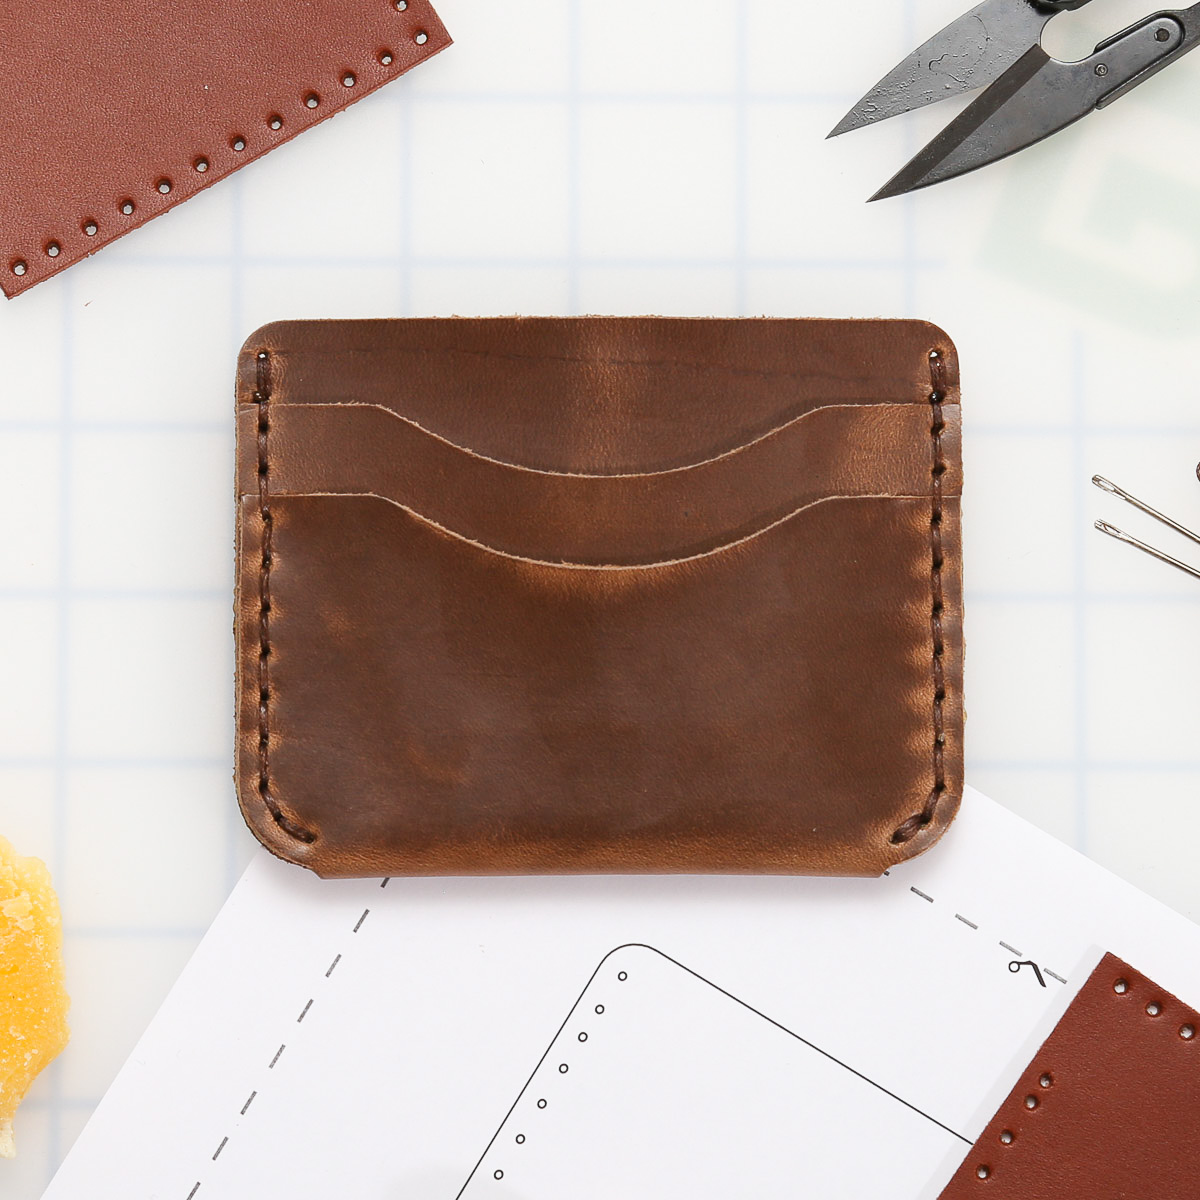 DIY Leather Bifold Wallet Kit - Do It Your Own Vegetable Tanned Natural Leather  Wallet - Black 